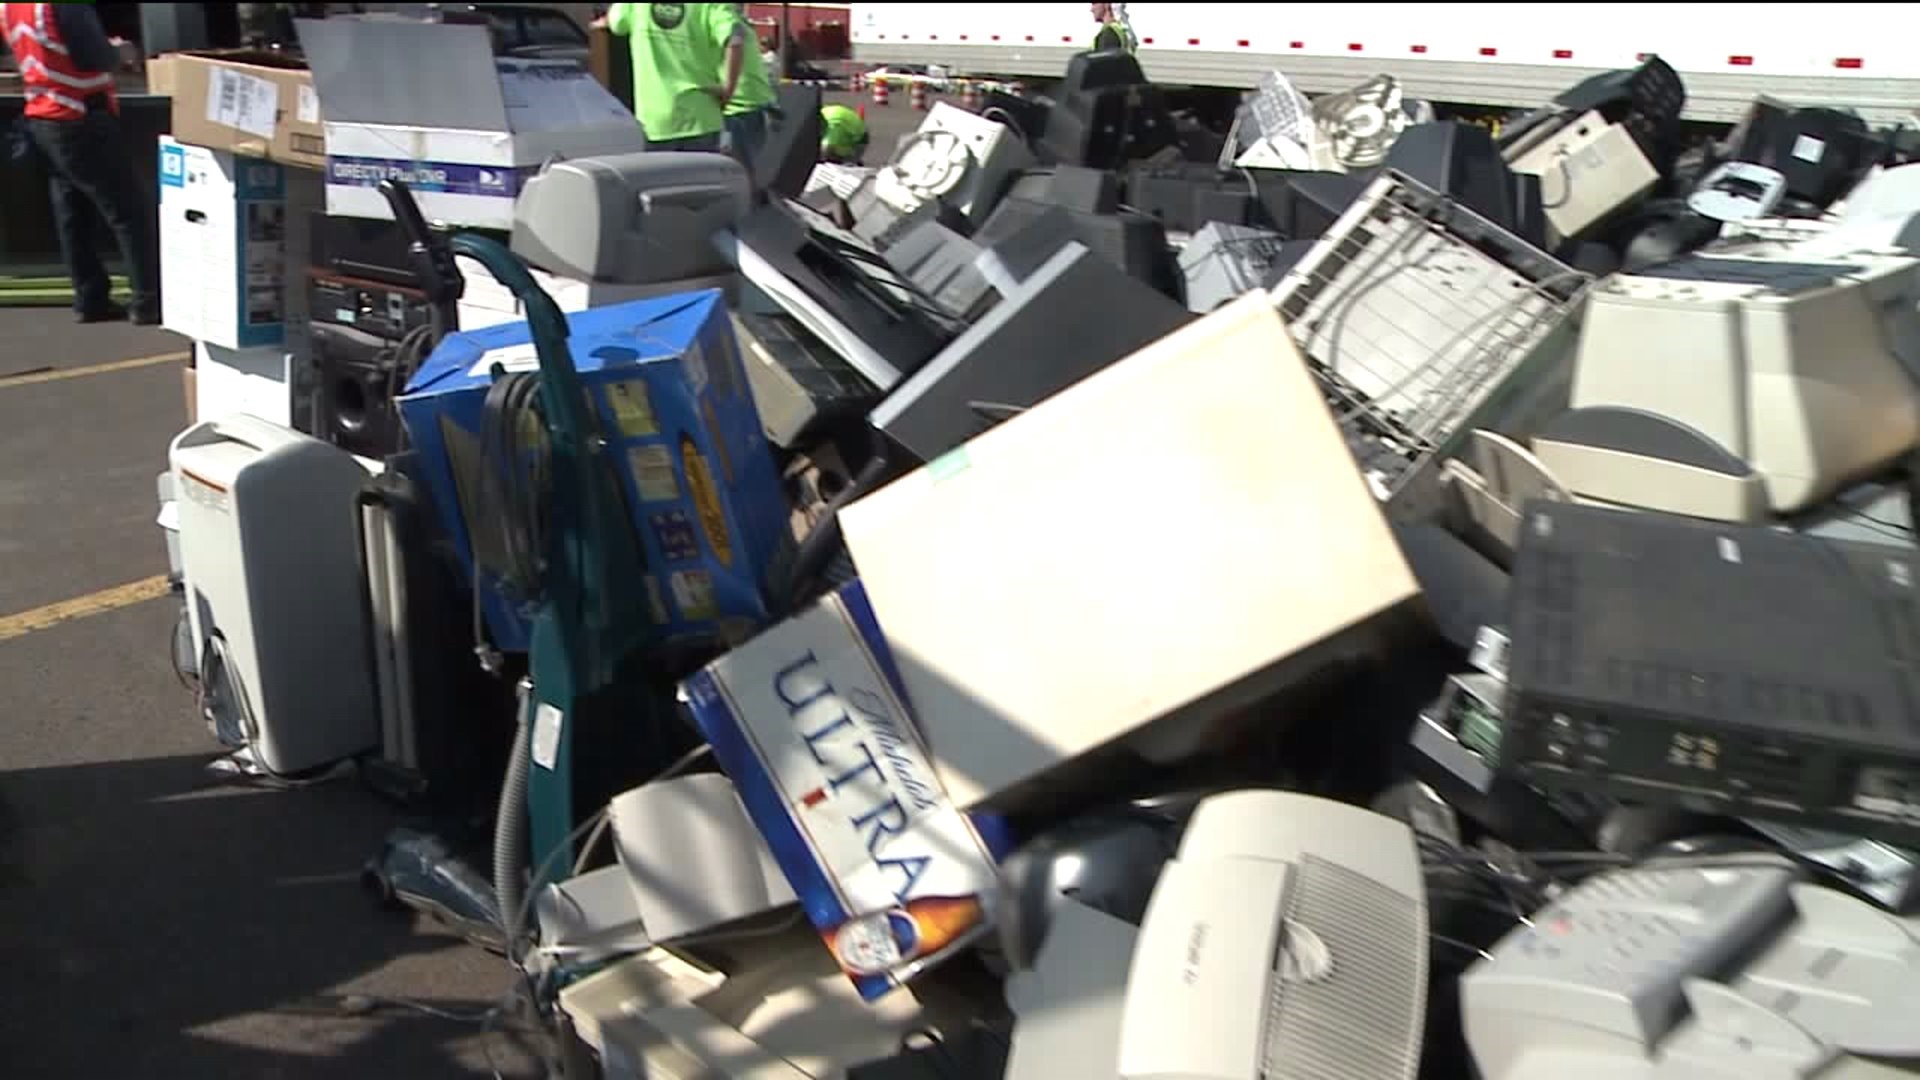 Power To Save: Electronics Recycling Event in Lackawanna County